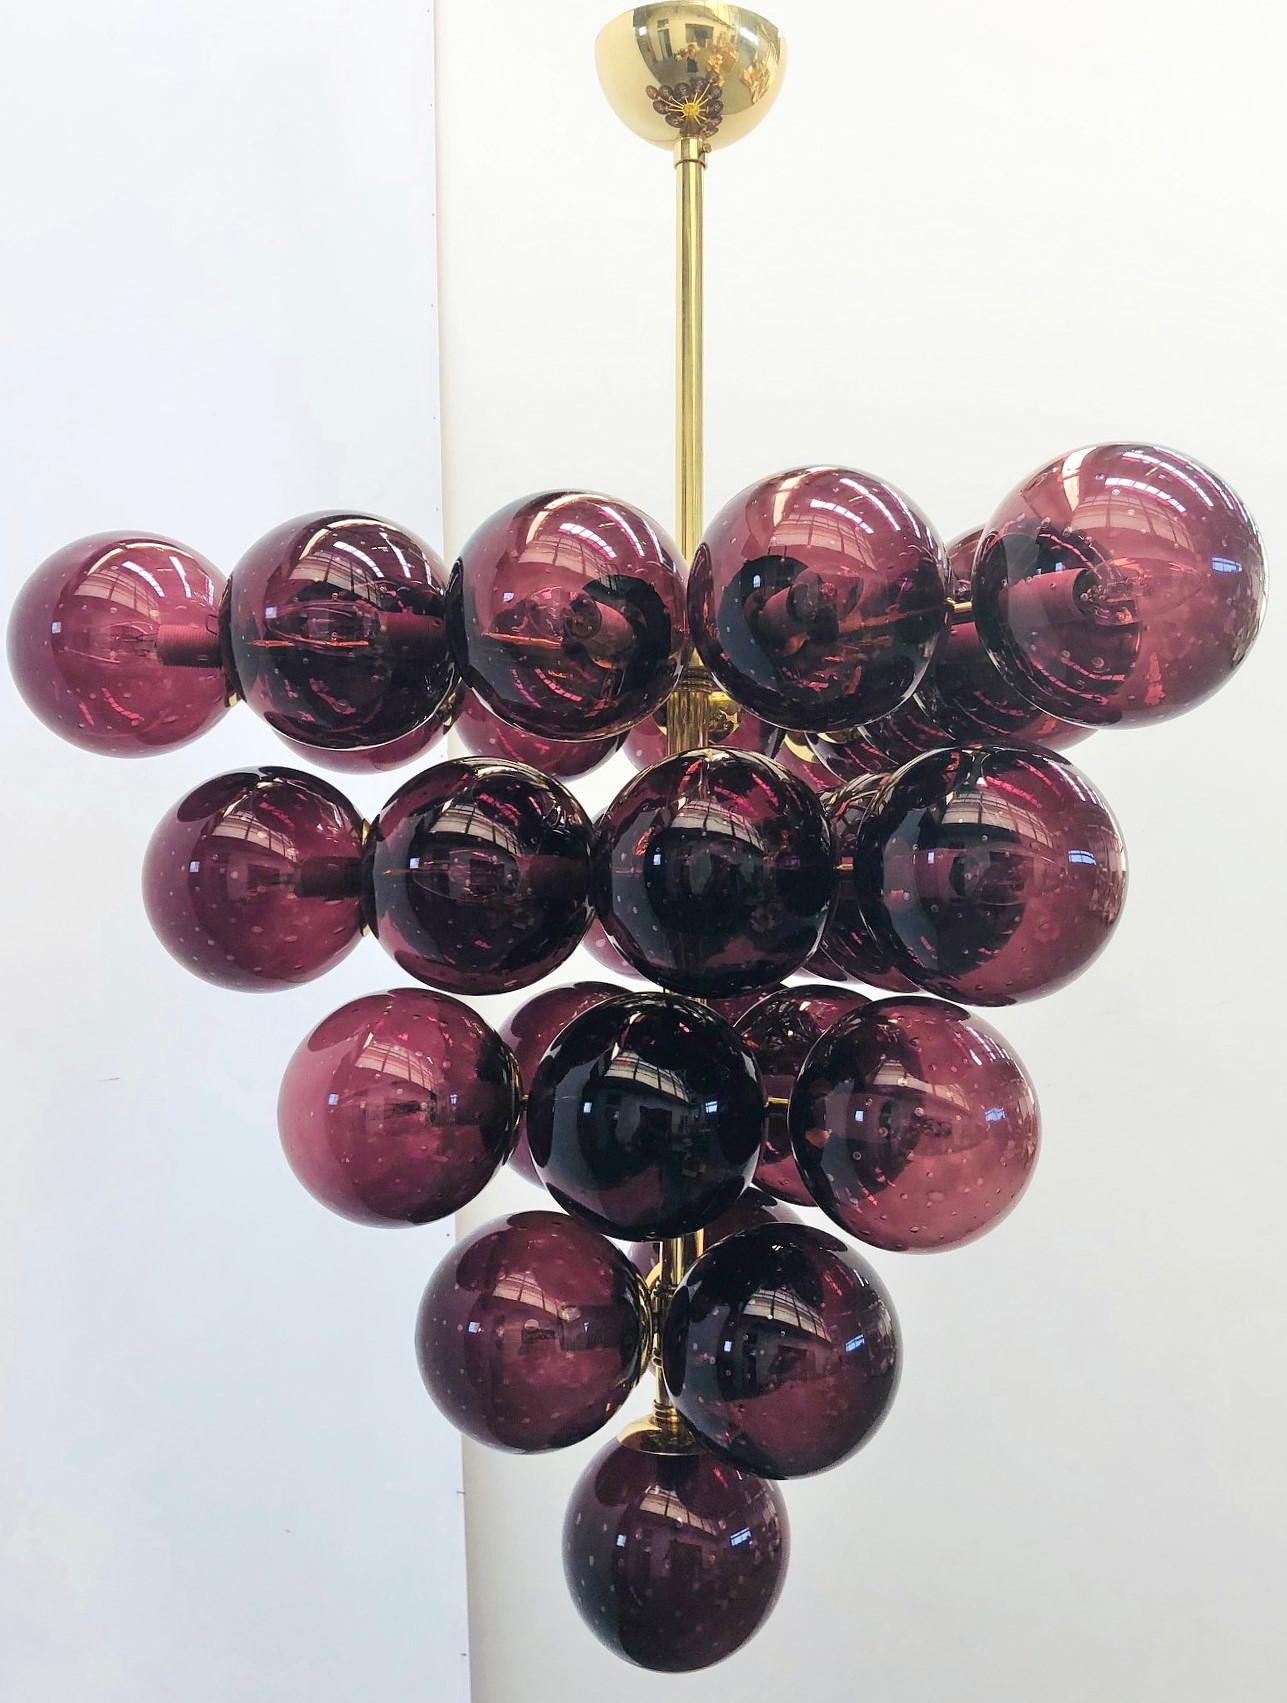 Italian chandelier with Amethyst Murano glass globes hand blown with bubbles inside the glass using Bollicine technique, mounted on polished brass frame / Designed by Fabio Bergomi for Fabio Ltd / Made in Italy
31 lights / E12 or E14 type / max 40W